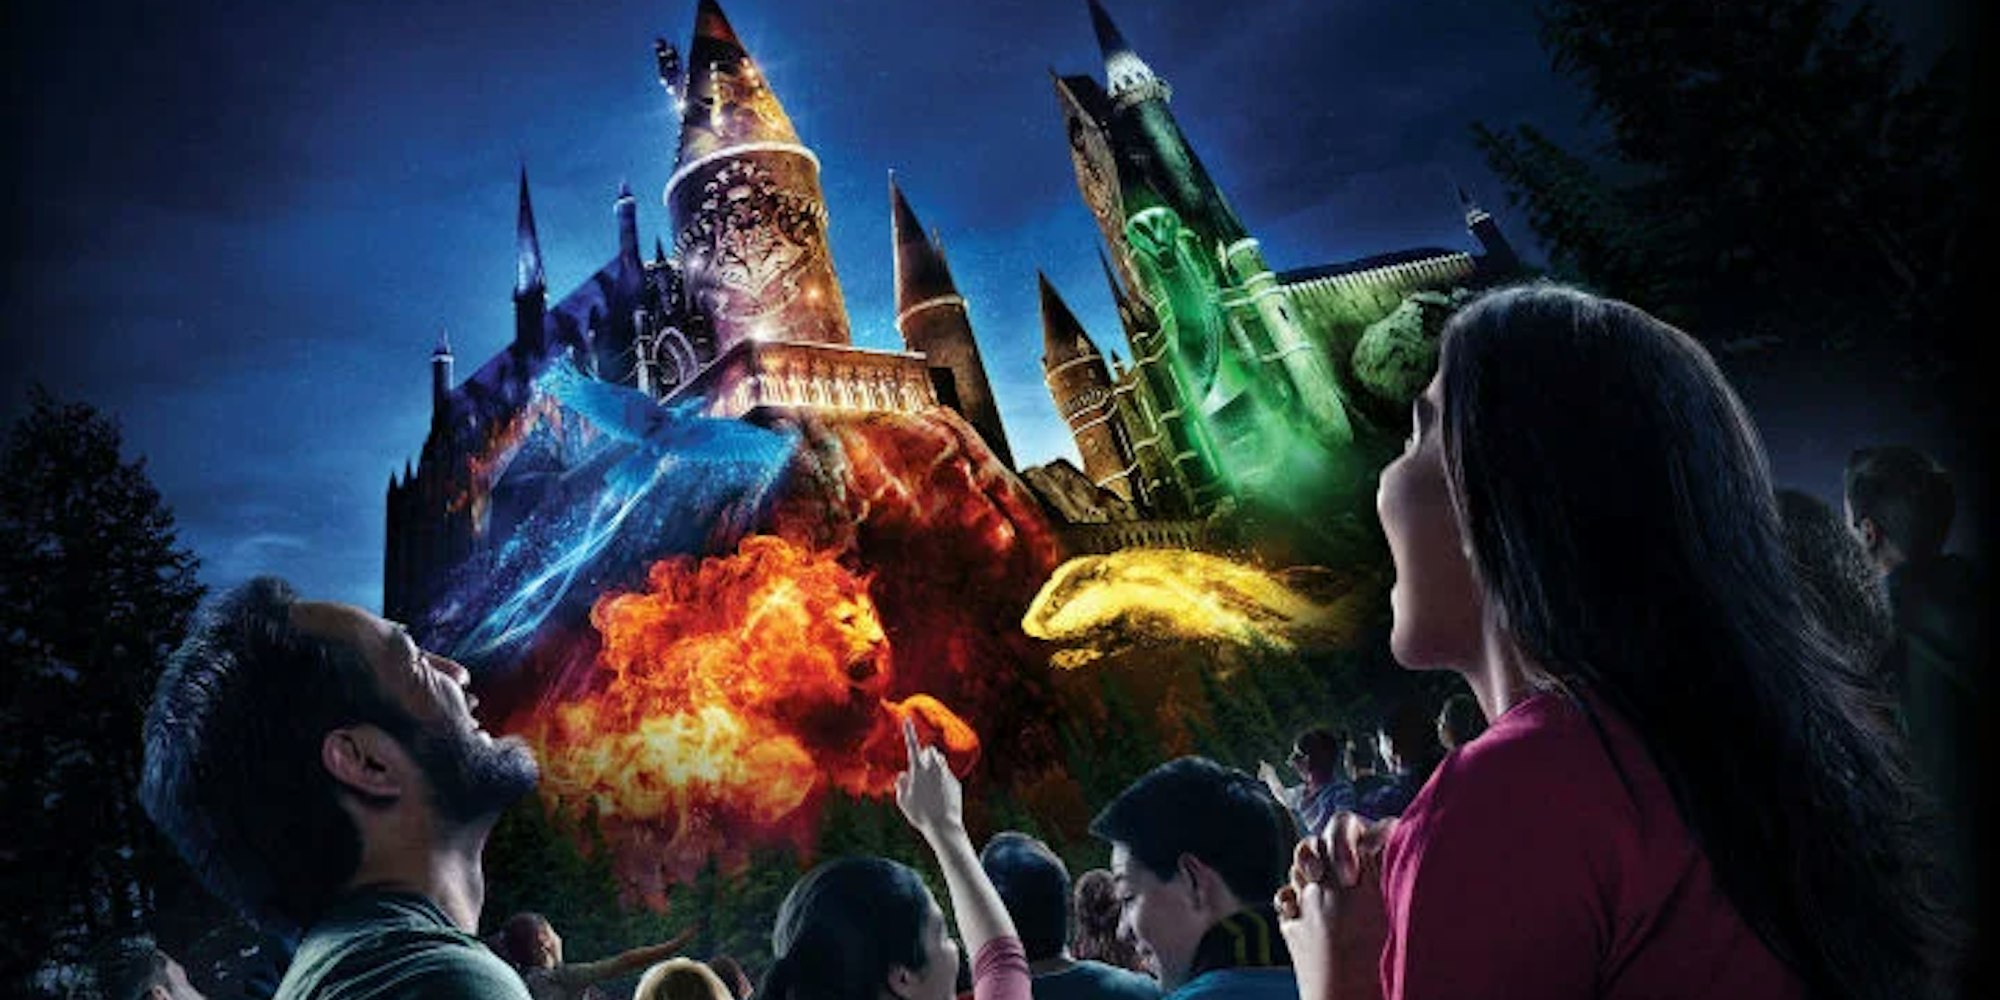 Cover Image for Closures and Refurbishments for Universal 2023/2024